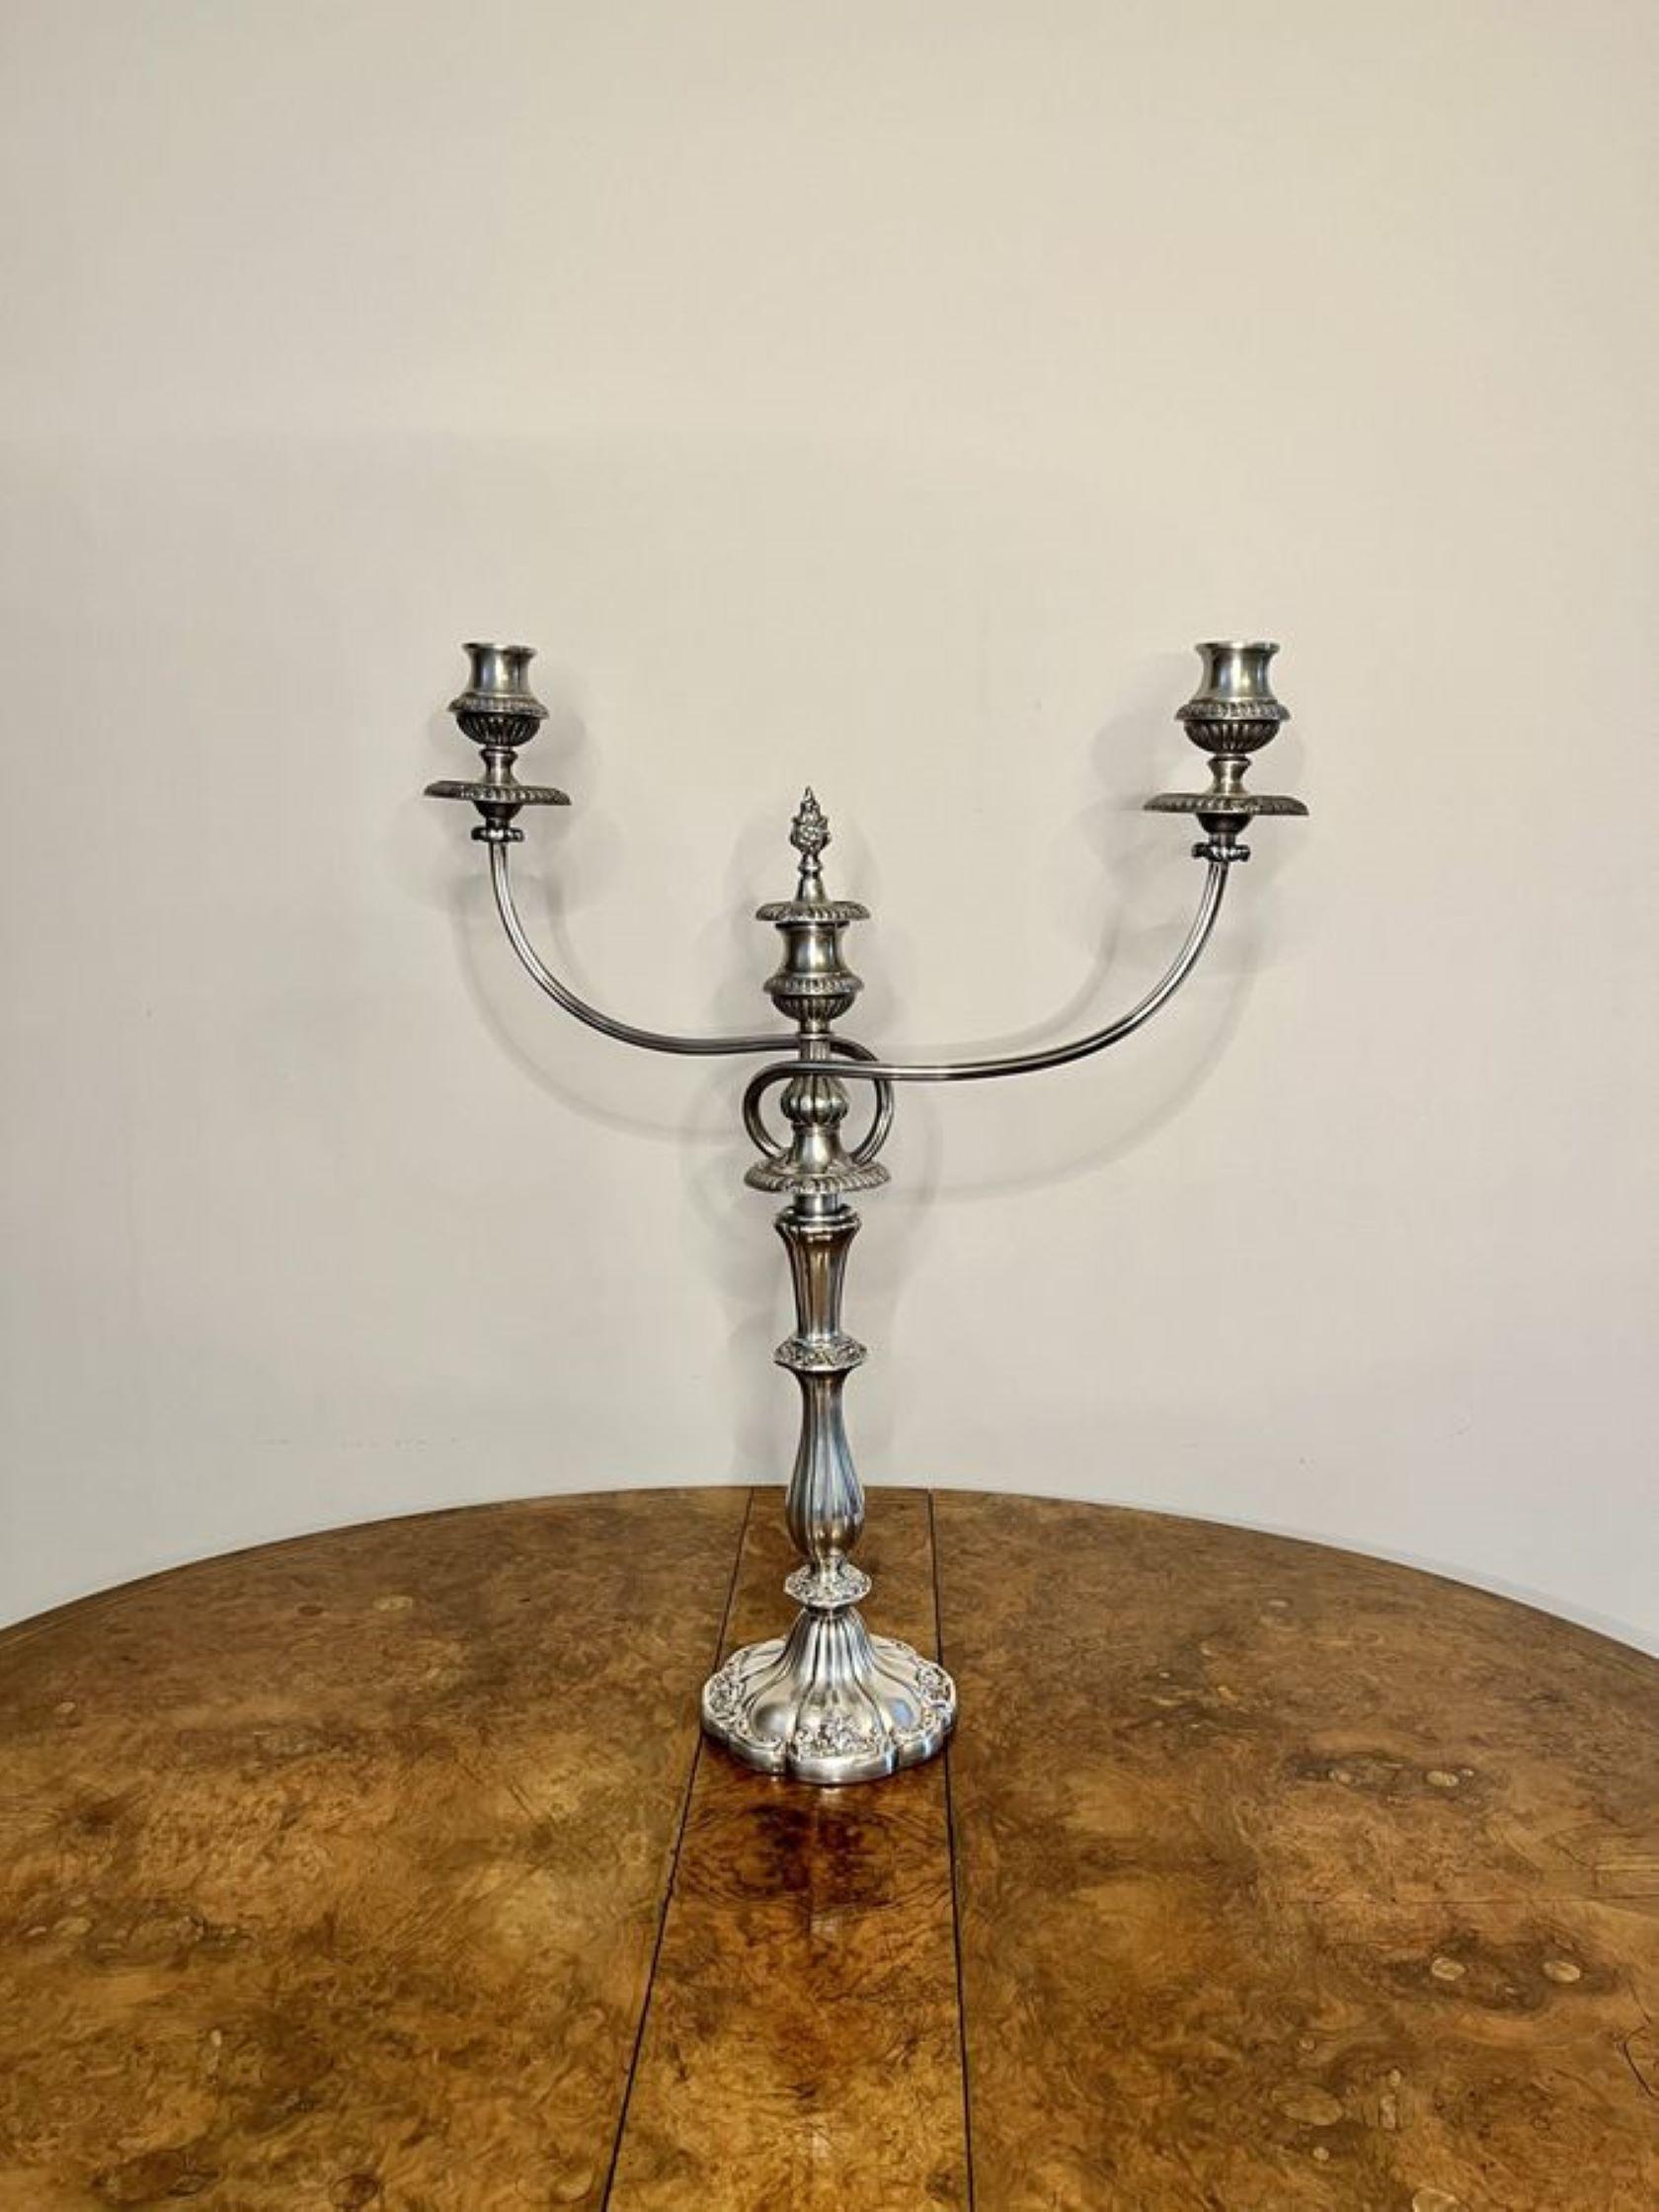 Fine quality antique Victorian silver plated candelabra having a quality ornate base and a shaped reeded column with a two branch candelabra with a center candle holder with a removable ornate finale.

D. 1880